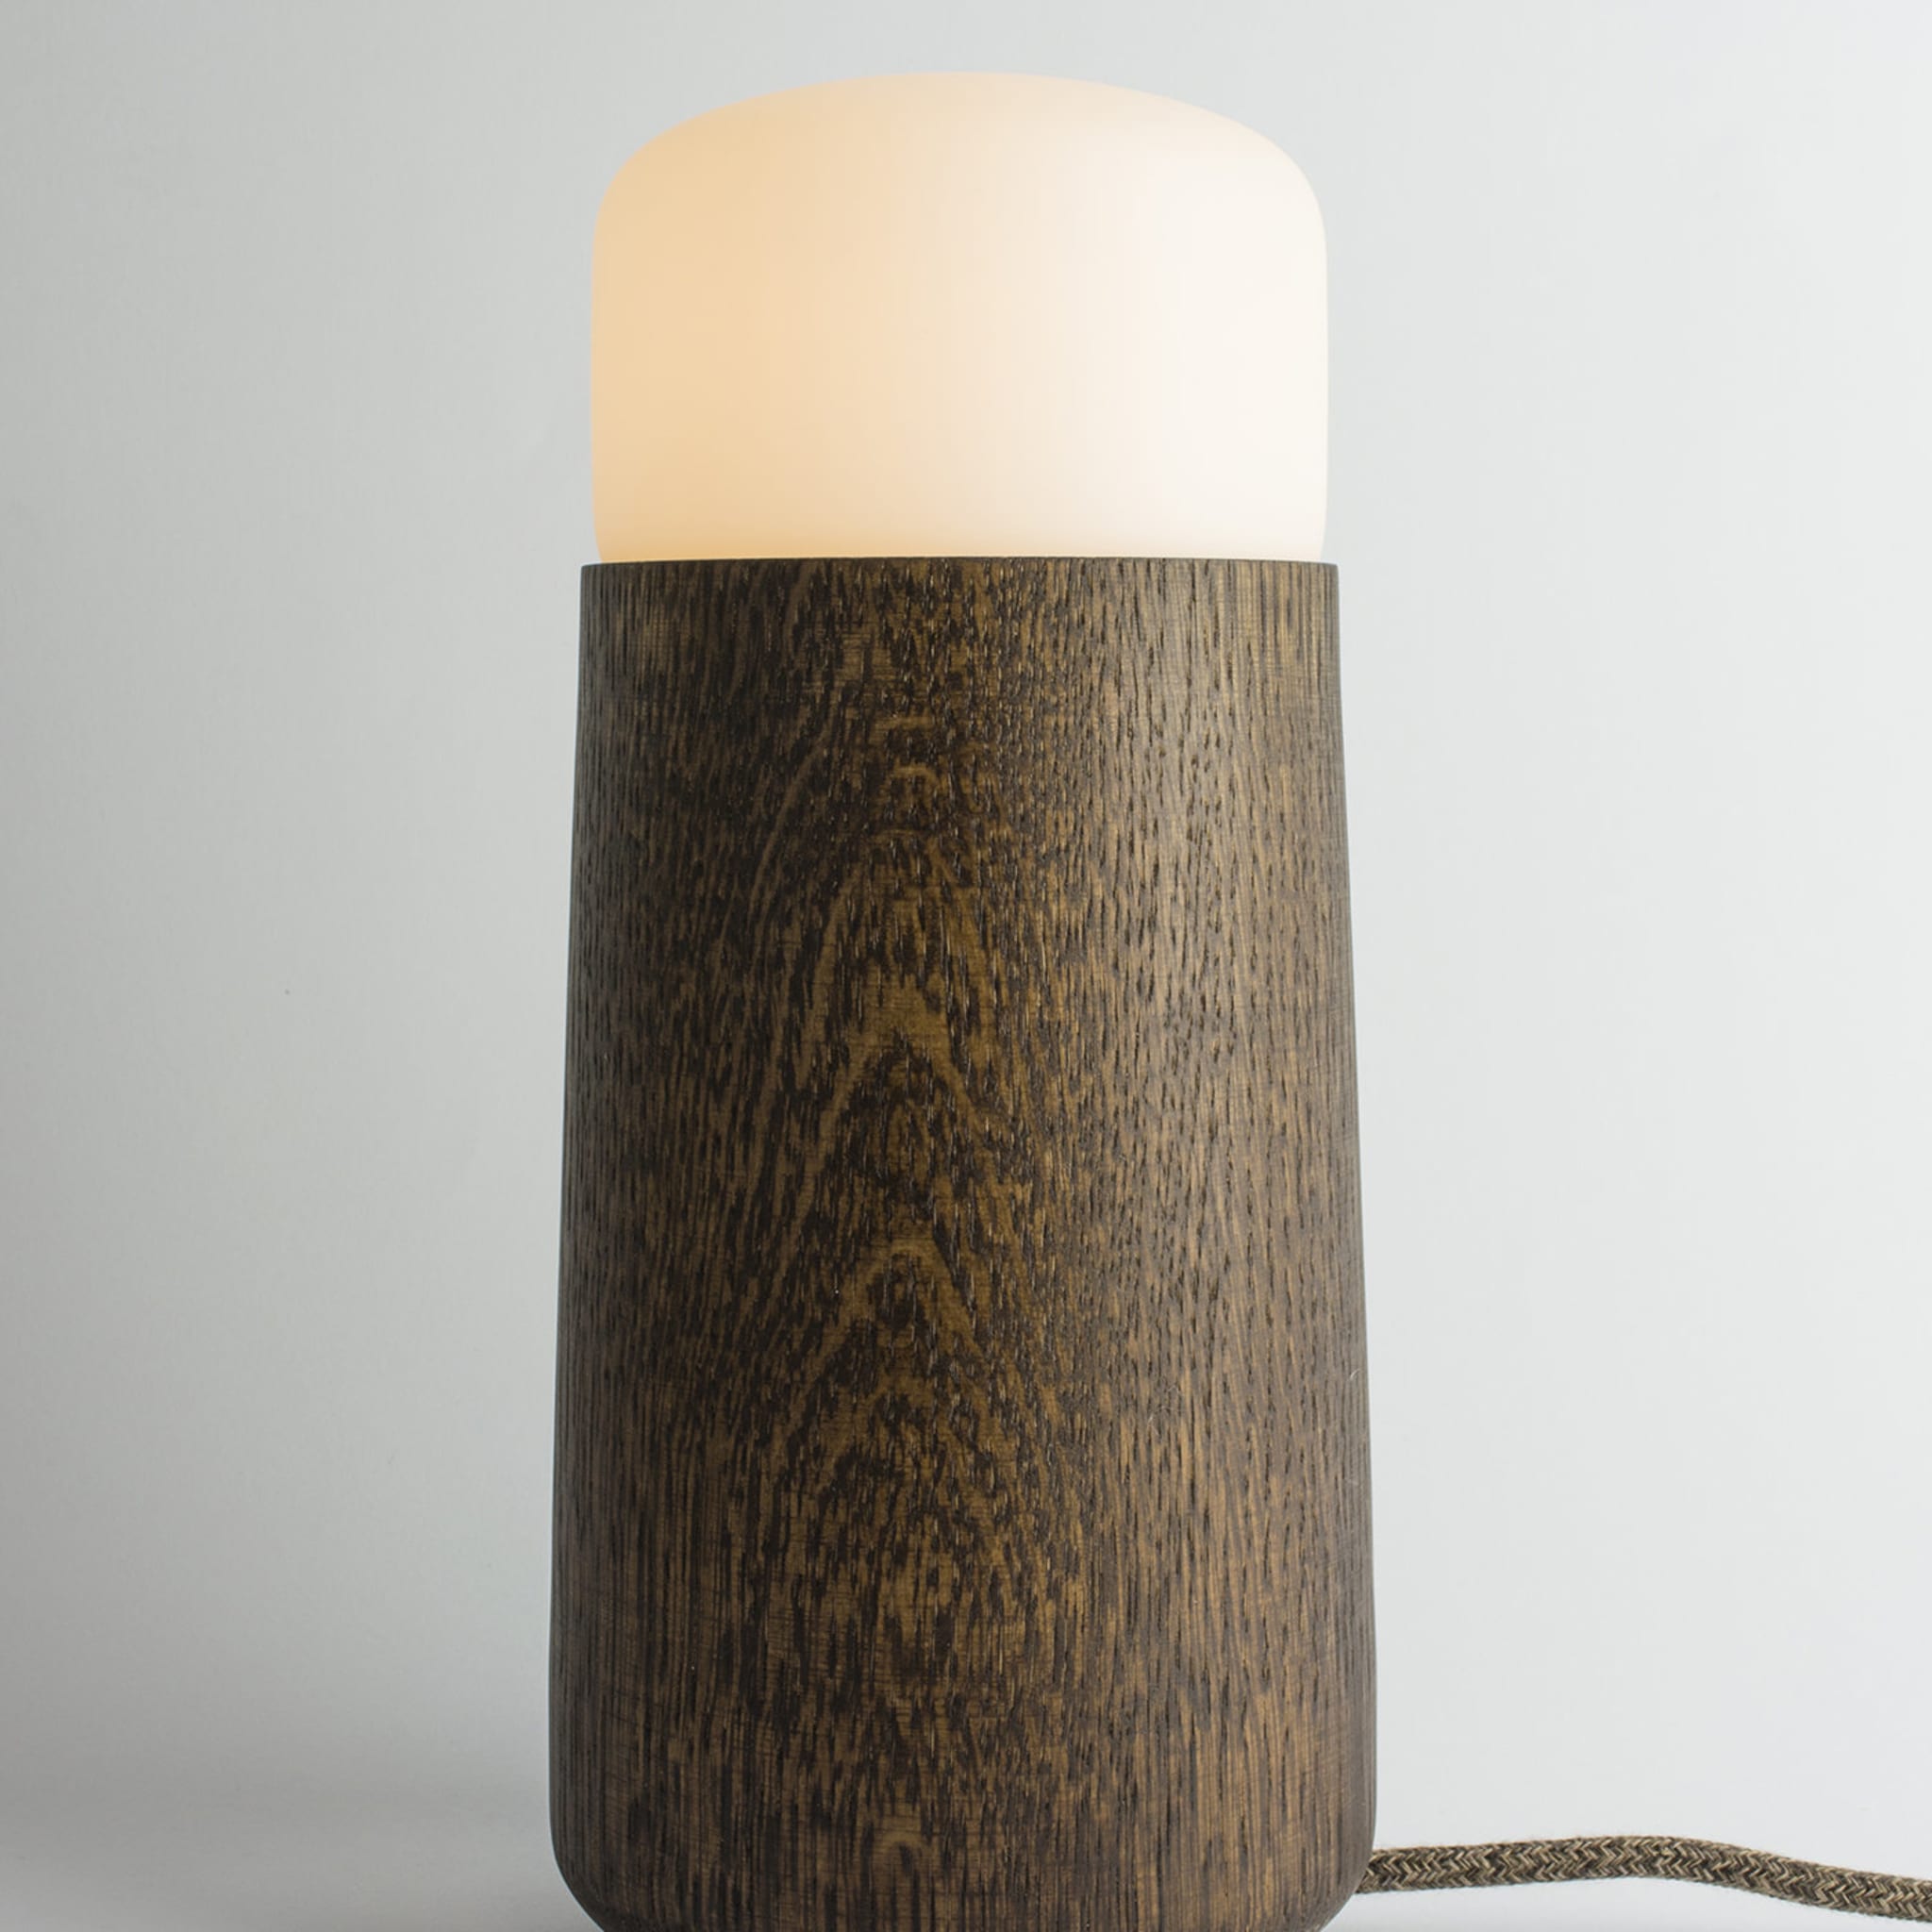 Silo Large Wood Table Lamp by Alalda Design - Alternative view 1